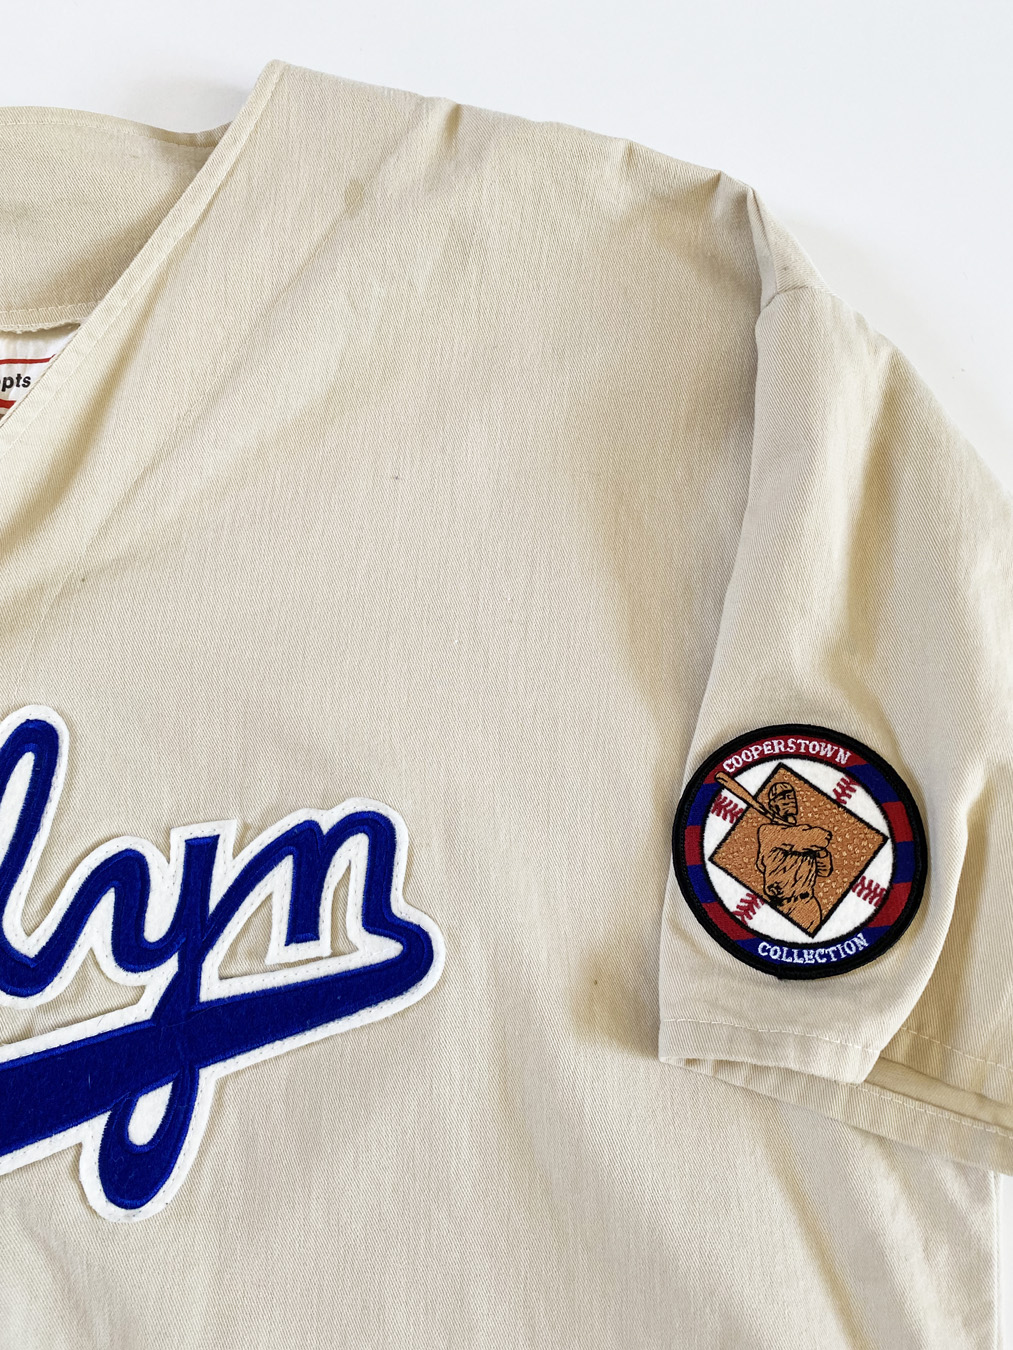 1883 Cooperstown Collection Brooklyn Dodgers Baseball Jersey – As